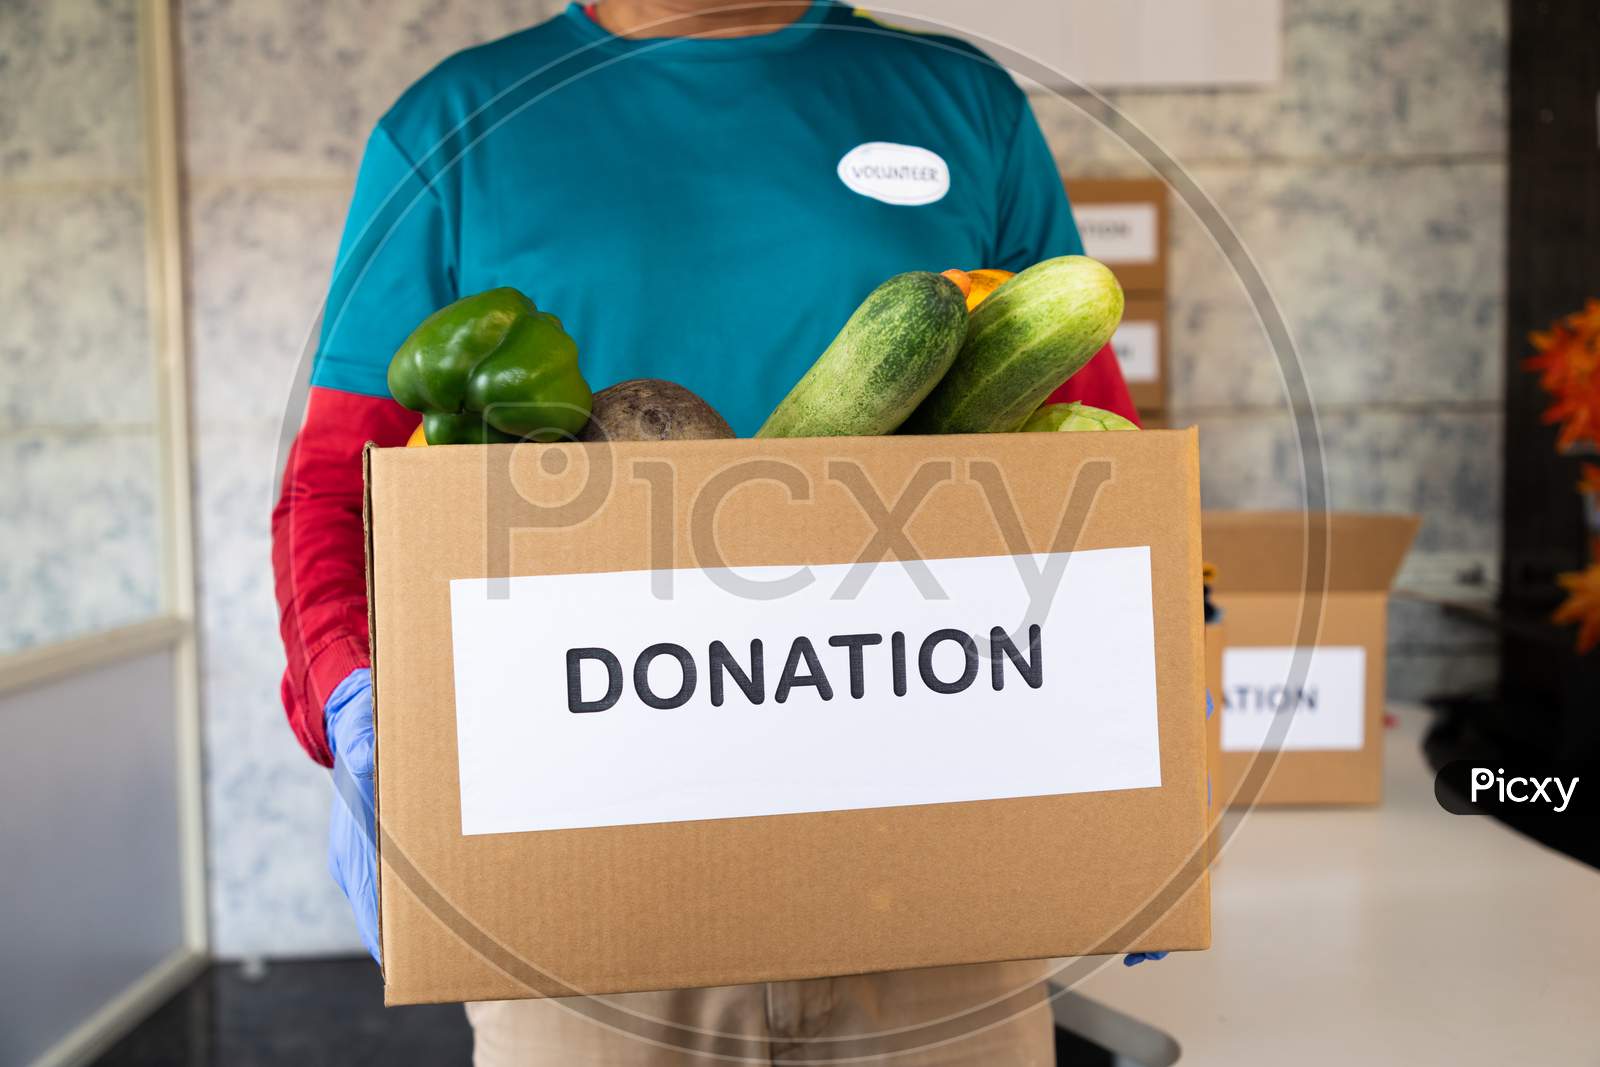 Unrecognizable Volunteer Holding Donation Box With Vegetables - Concept Of People Volunteering To Help Others During Coronavirus Covid-19 Pandemic Lockdown.